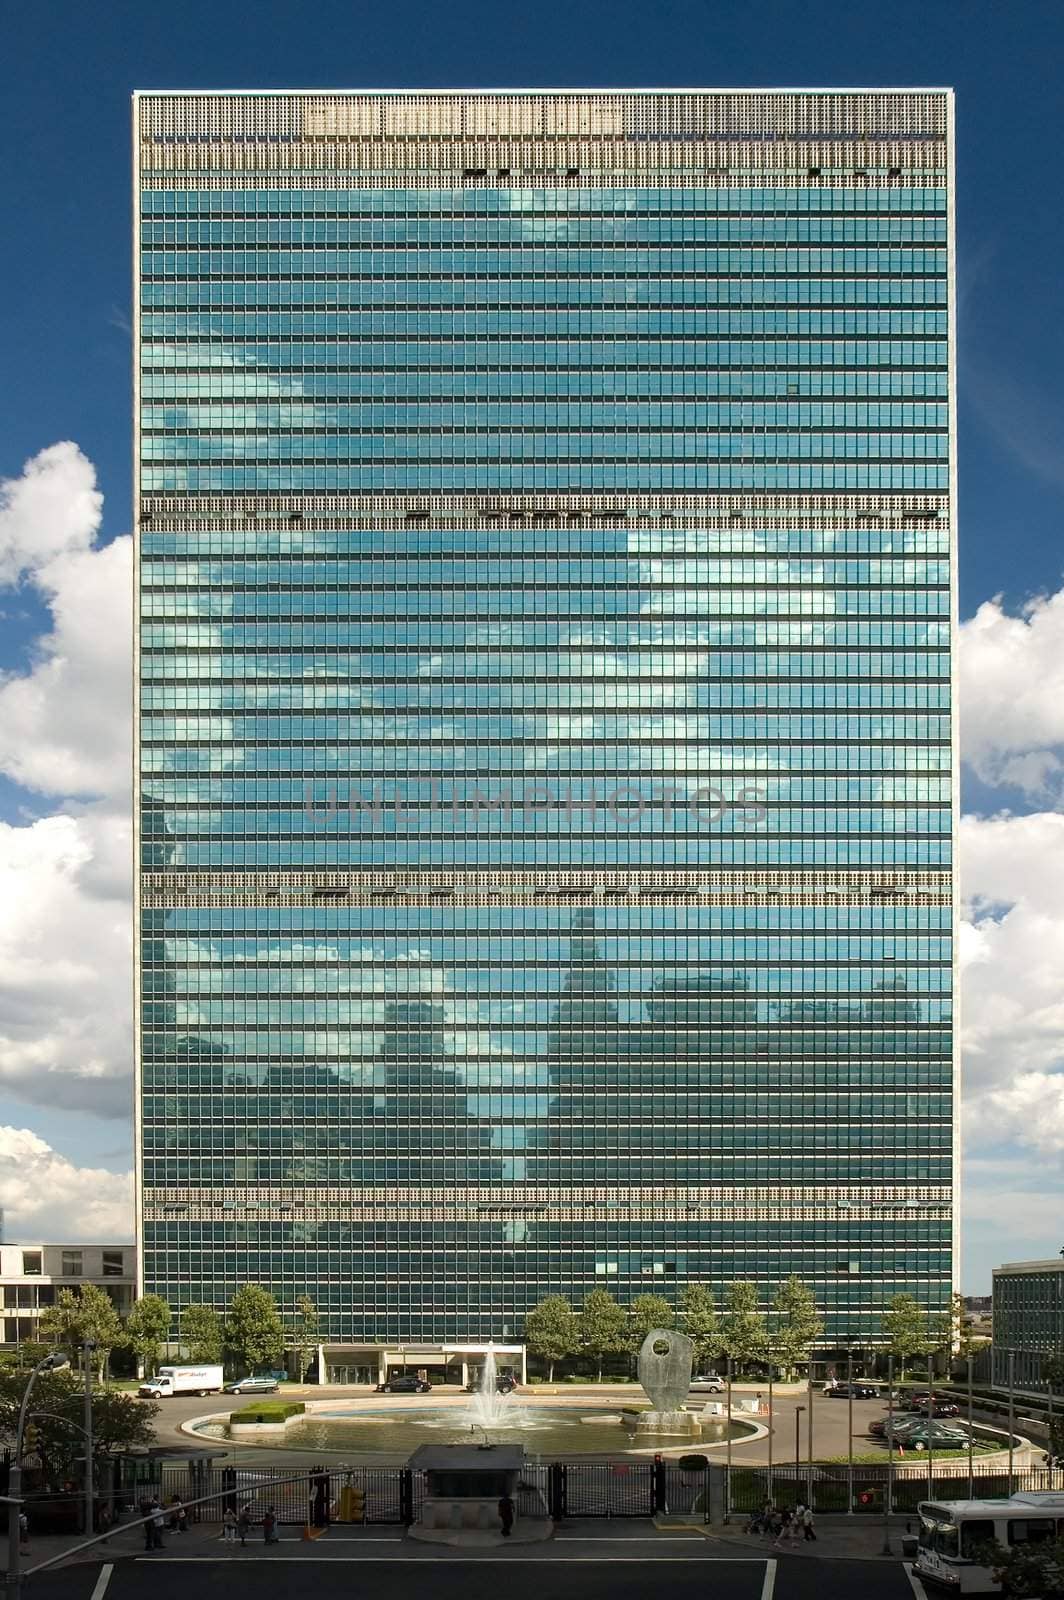 United Nations Headquarters by rorem